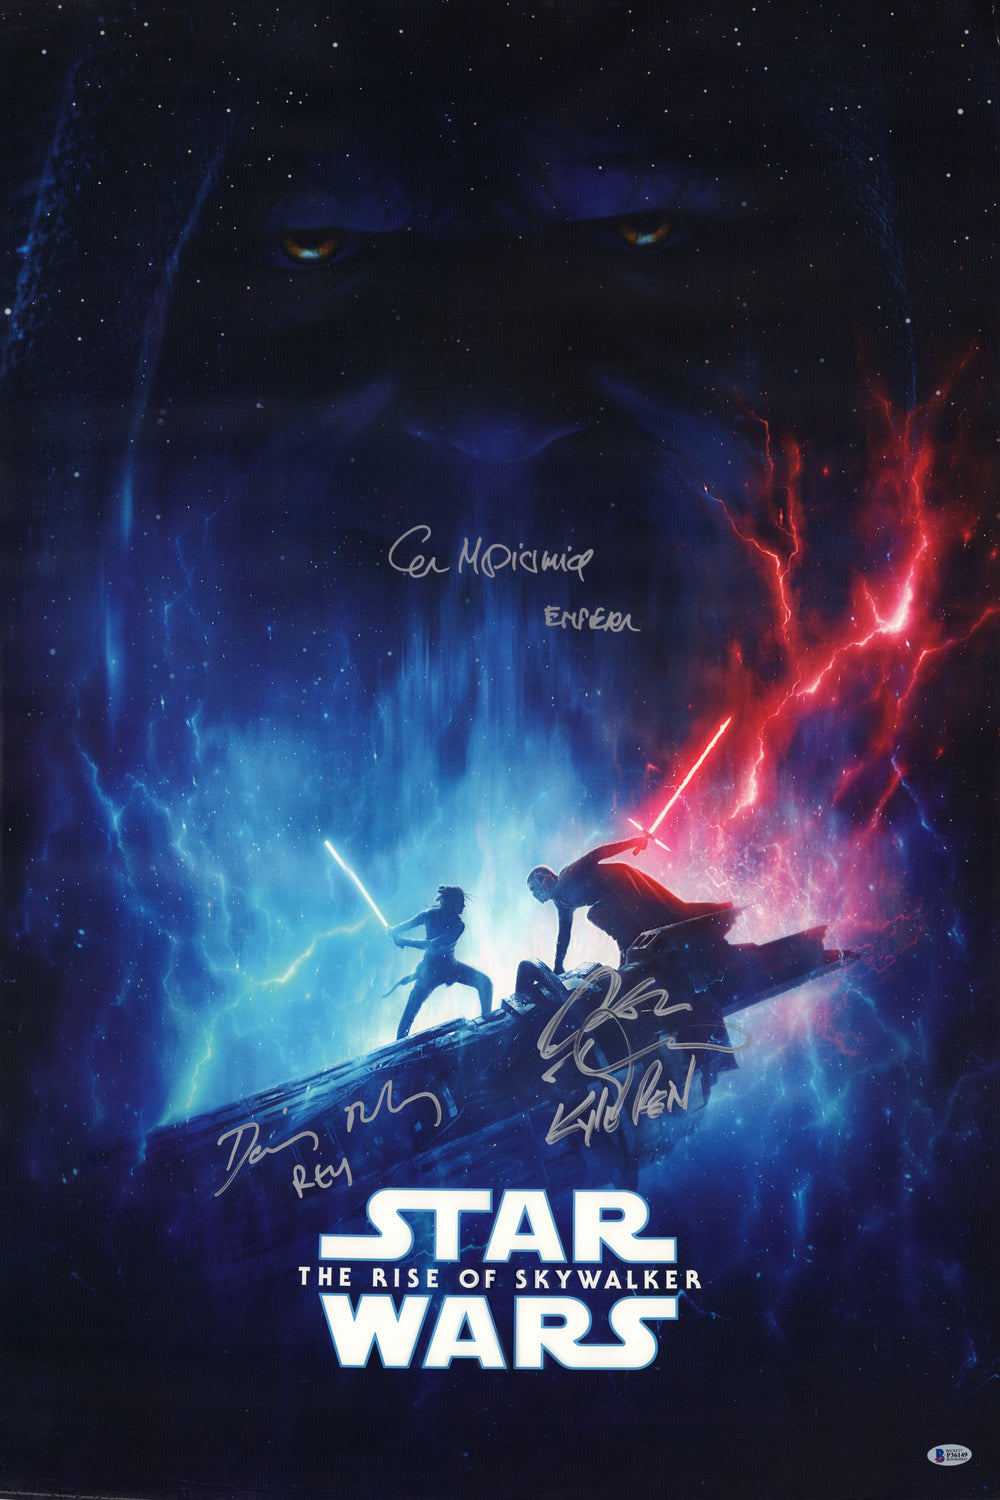 Daisy Ridley as Rey, Adam Driver as Kylo Ren, & Ian McDiarmid as The Emperor in Star Wars: The Rise of Skywalker (Beckett Witnessed) Signed 24x36 Poster